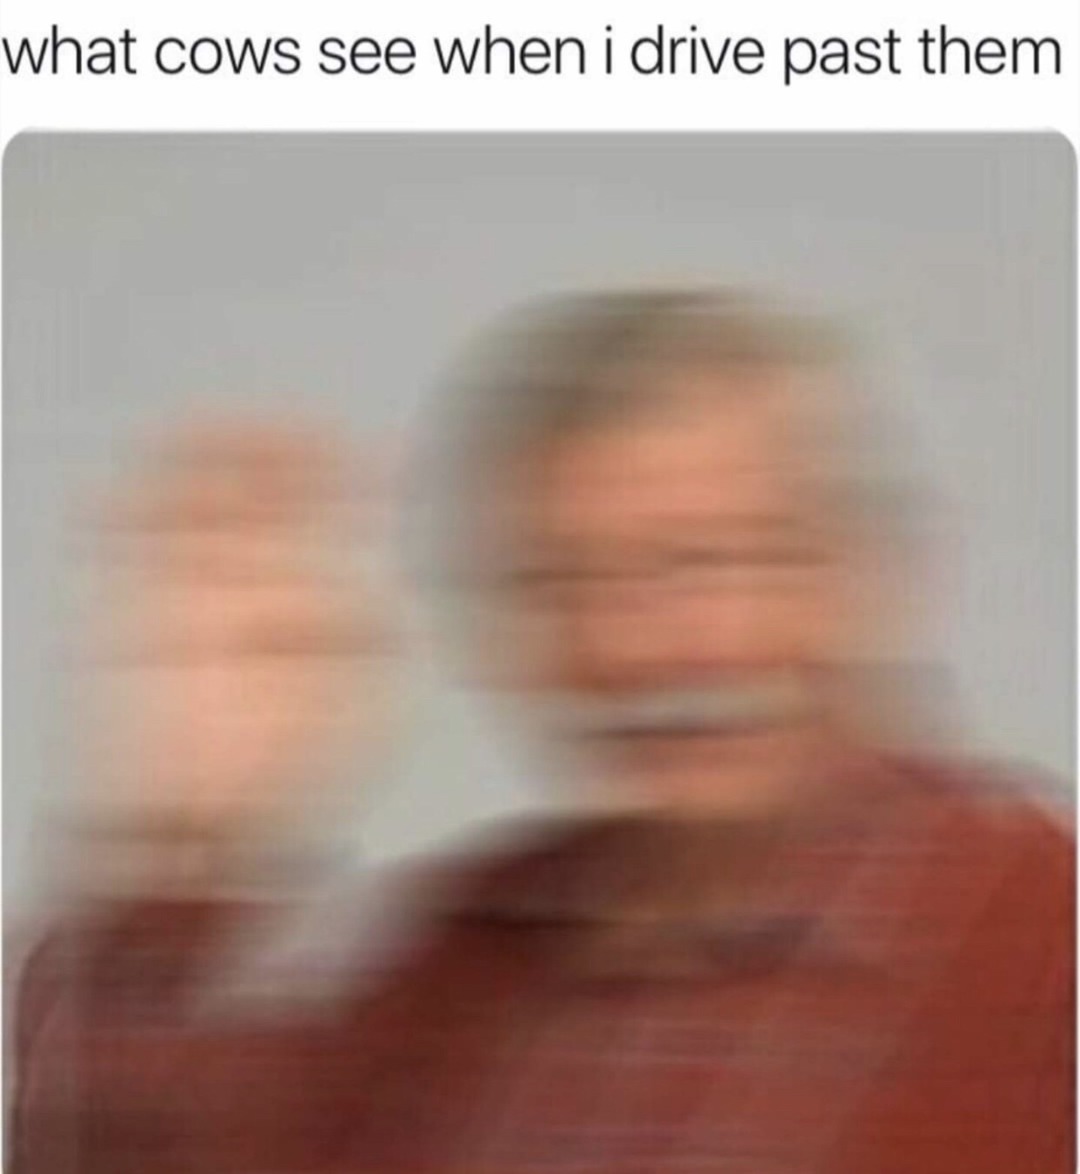 Cow's point of view - meme